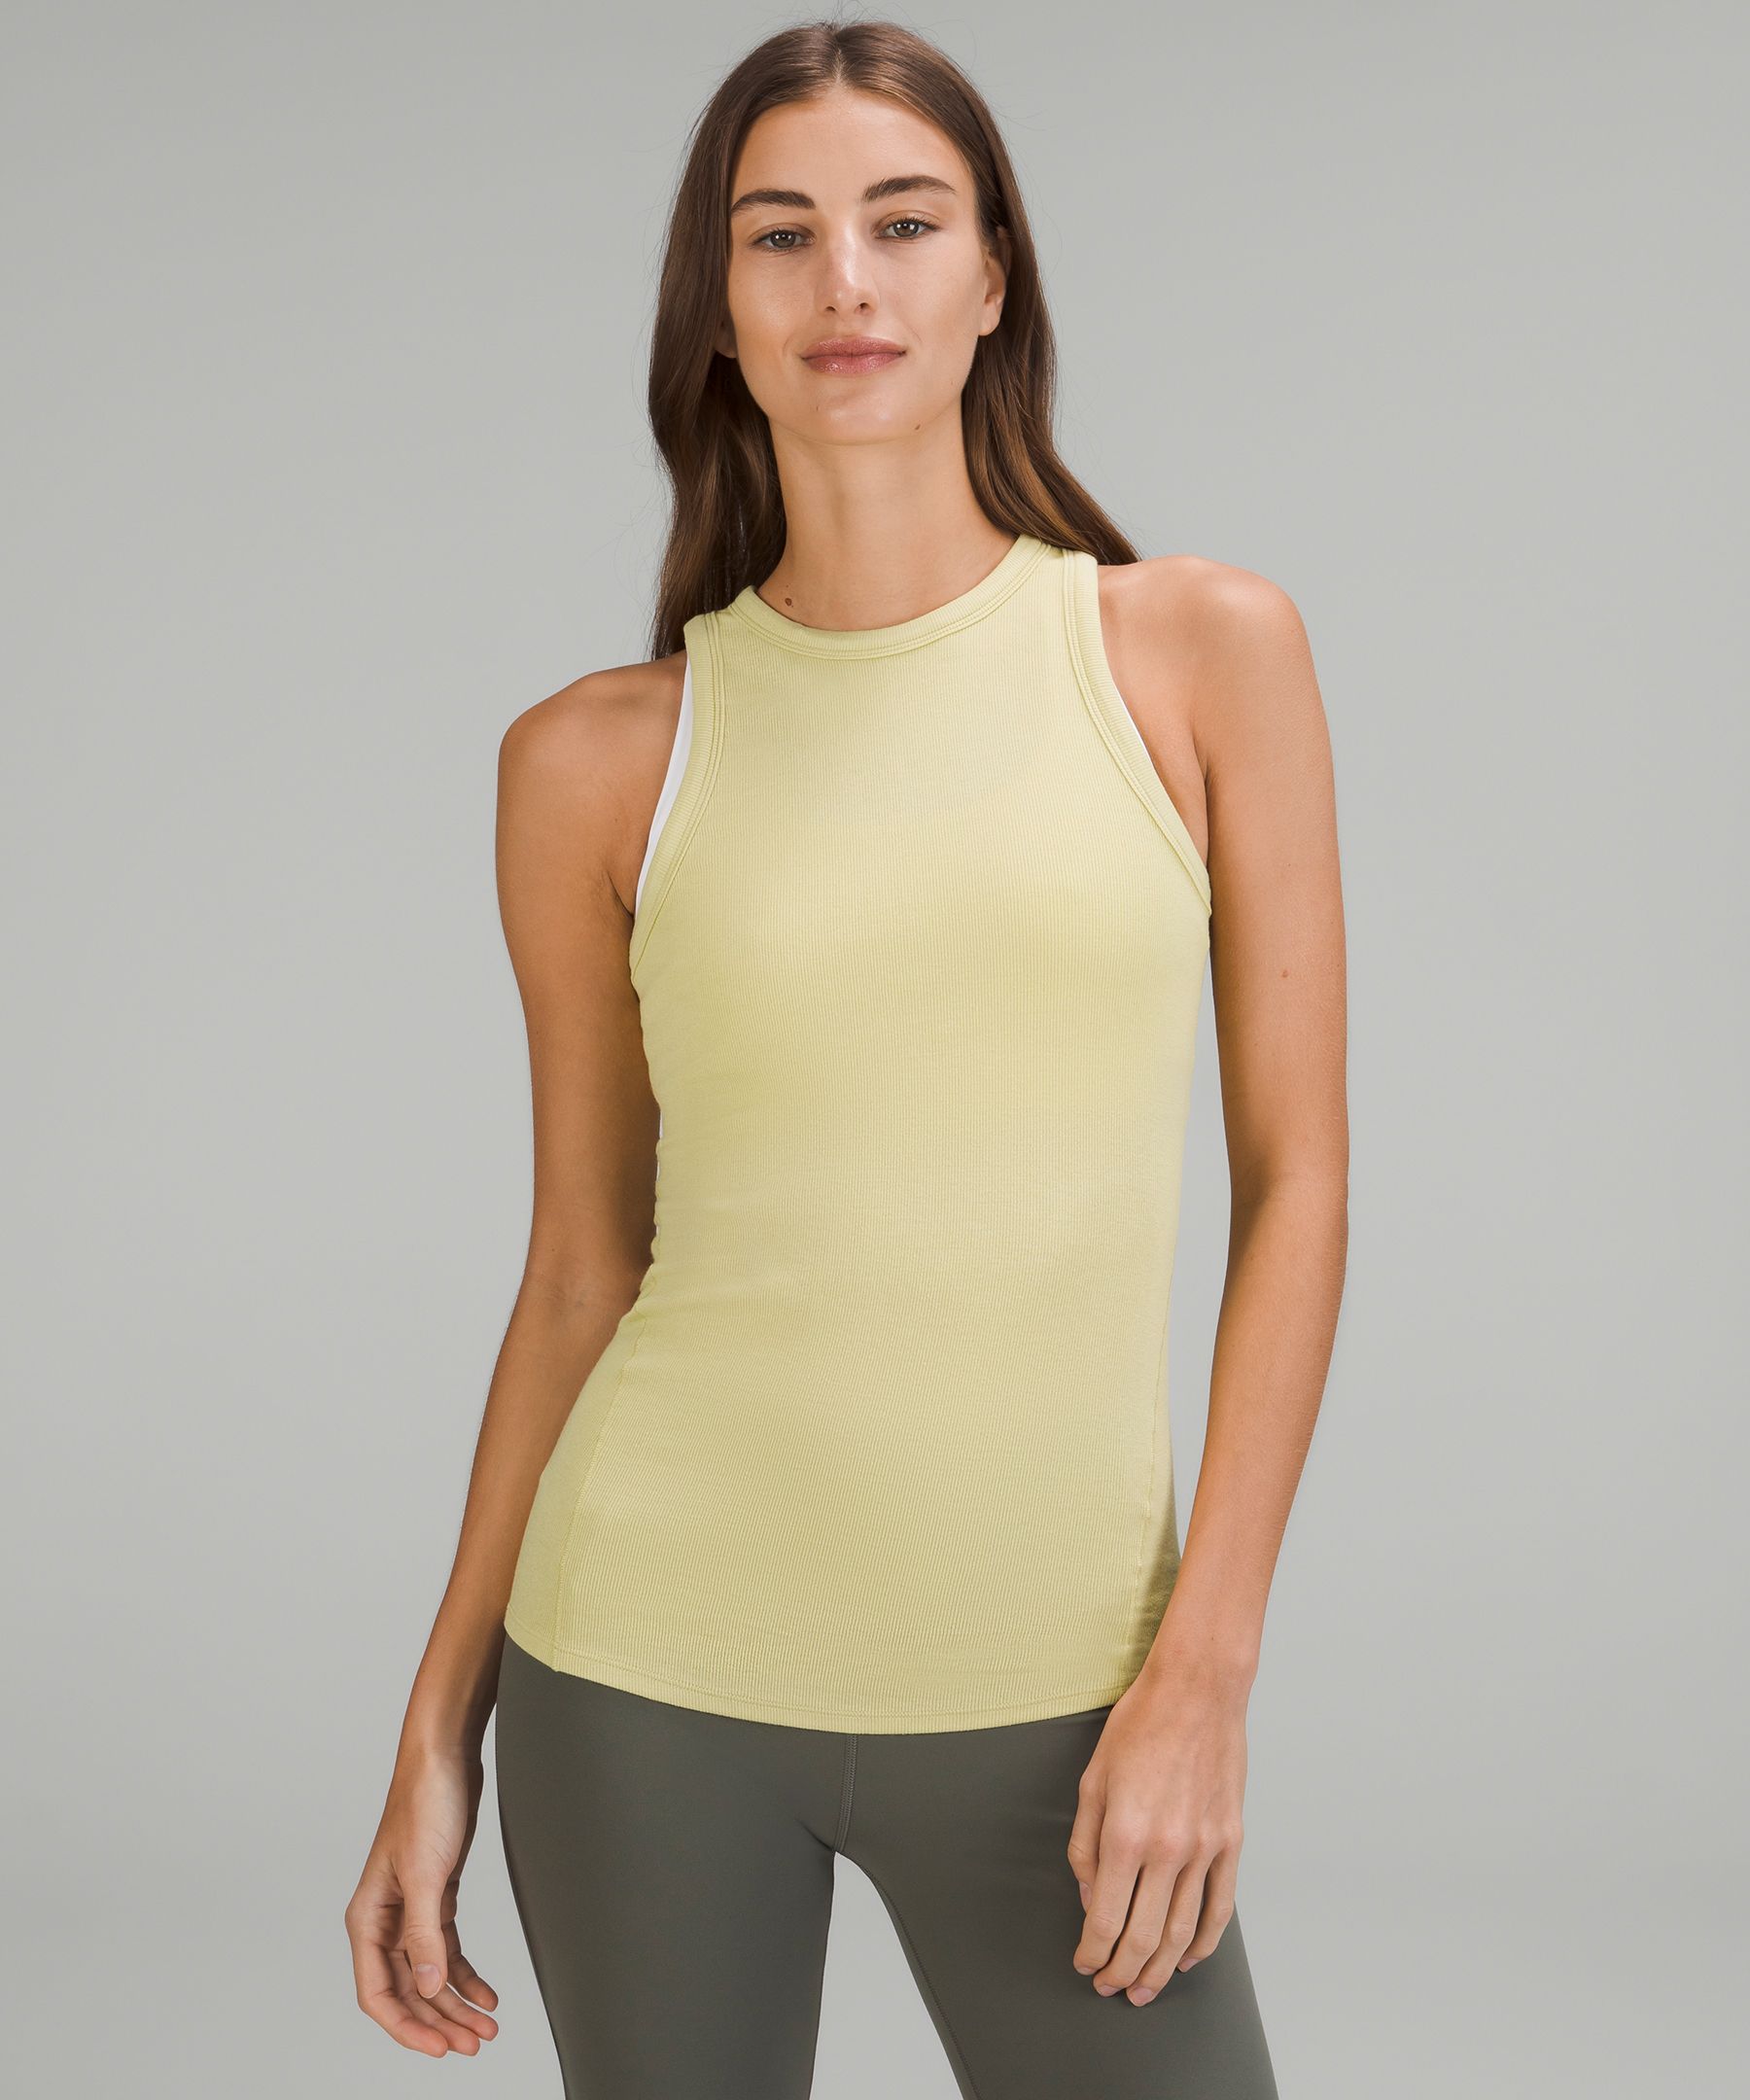 Lululemon Hold Tight Cropped Tank Top - White/Neutral - Size 10 Ribbed Modal Fabric